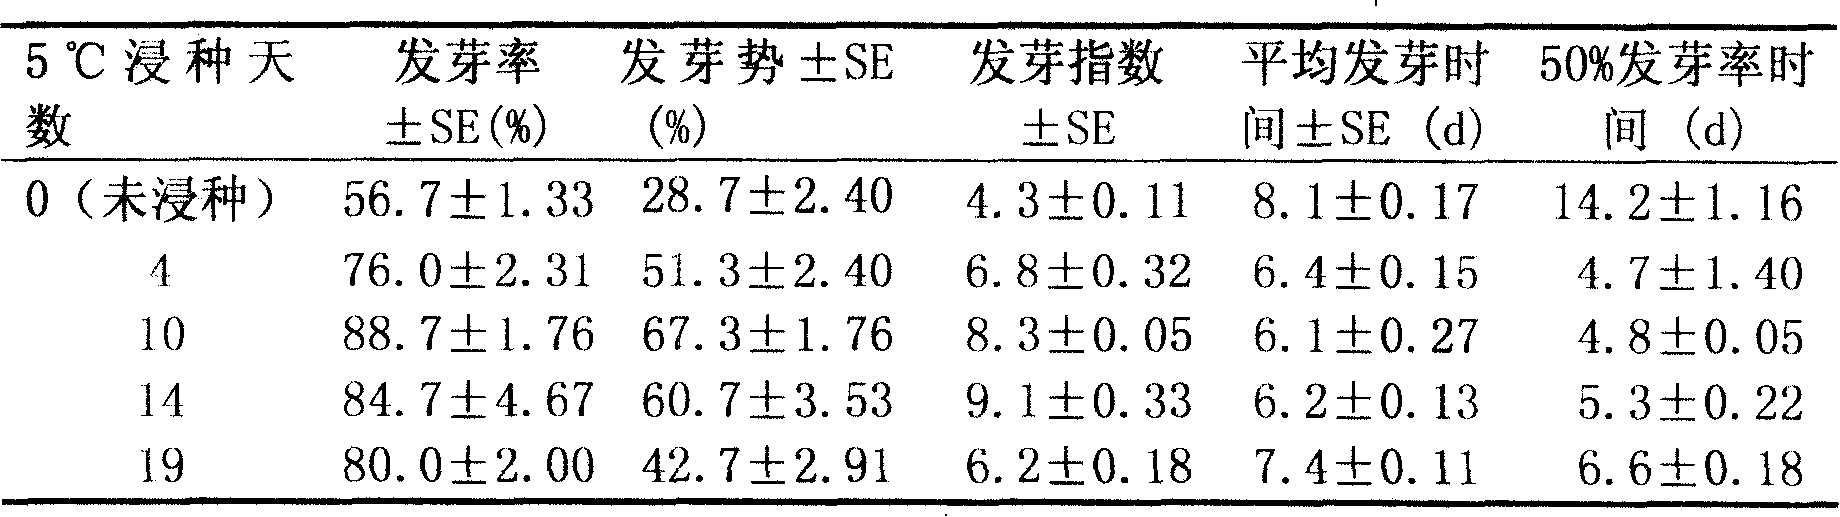 Leymus chinensis low-temperature seed presoaking and temperature changing combination germinating method